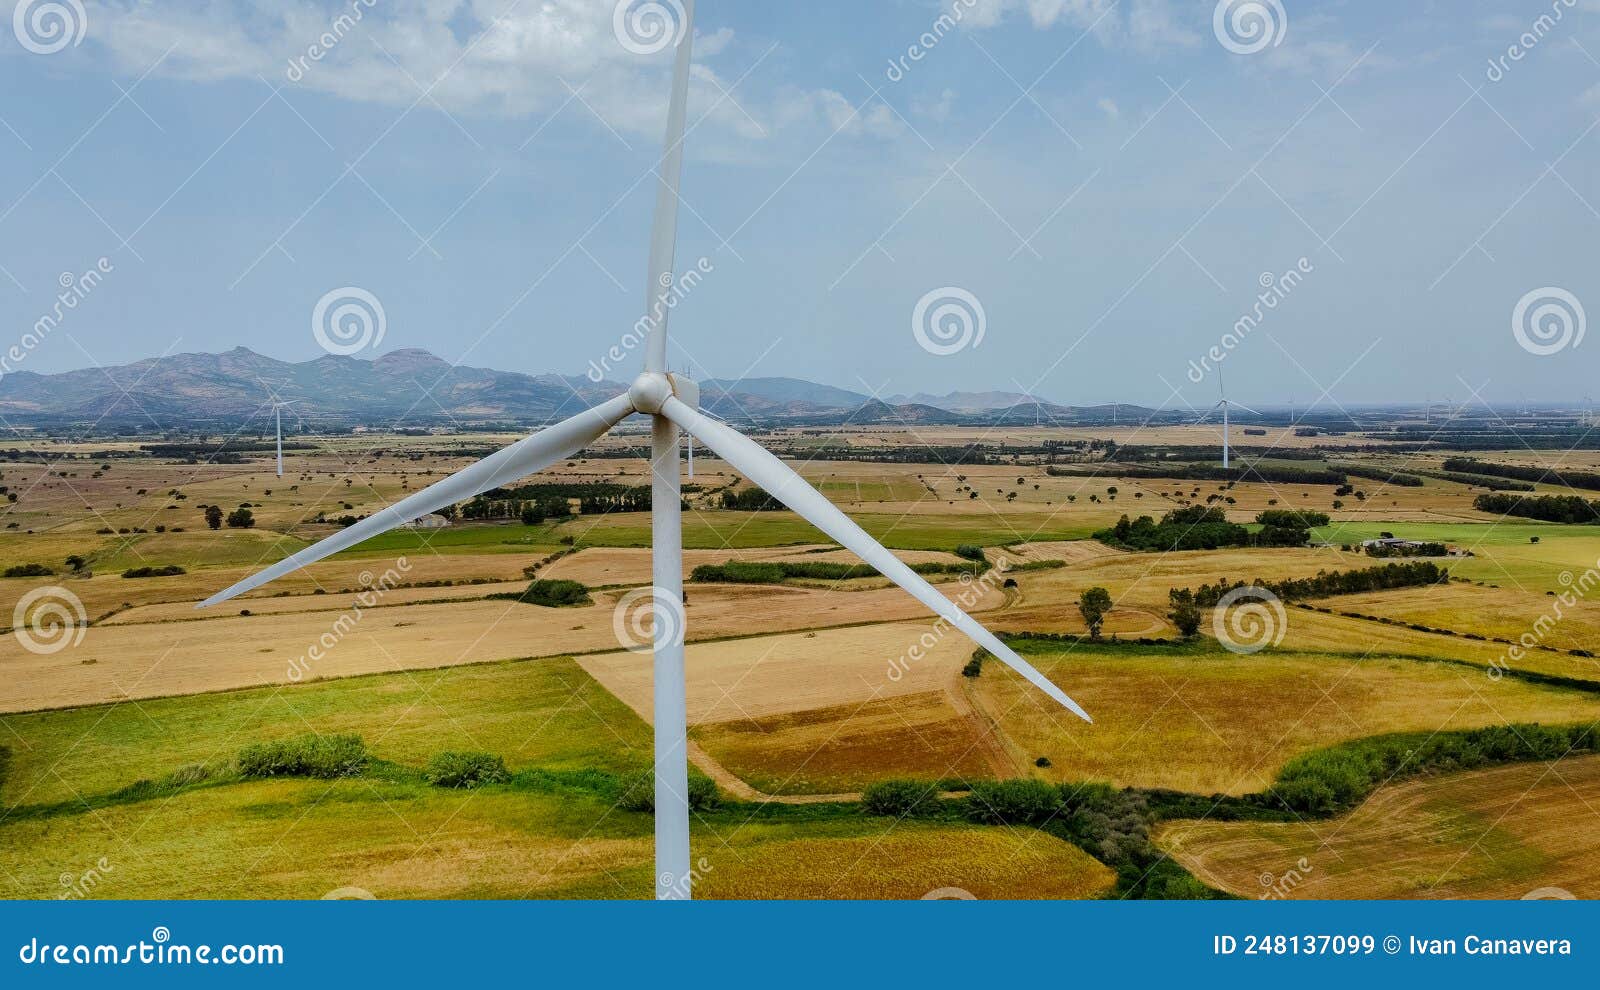 wind turbine with a cloudy and gray sky, villacidro